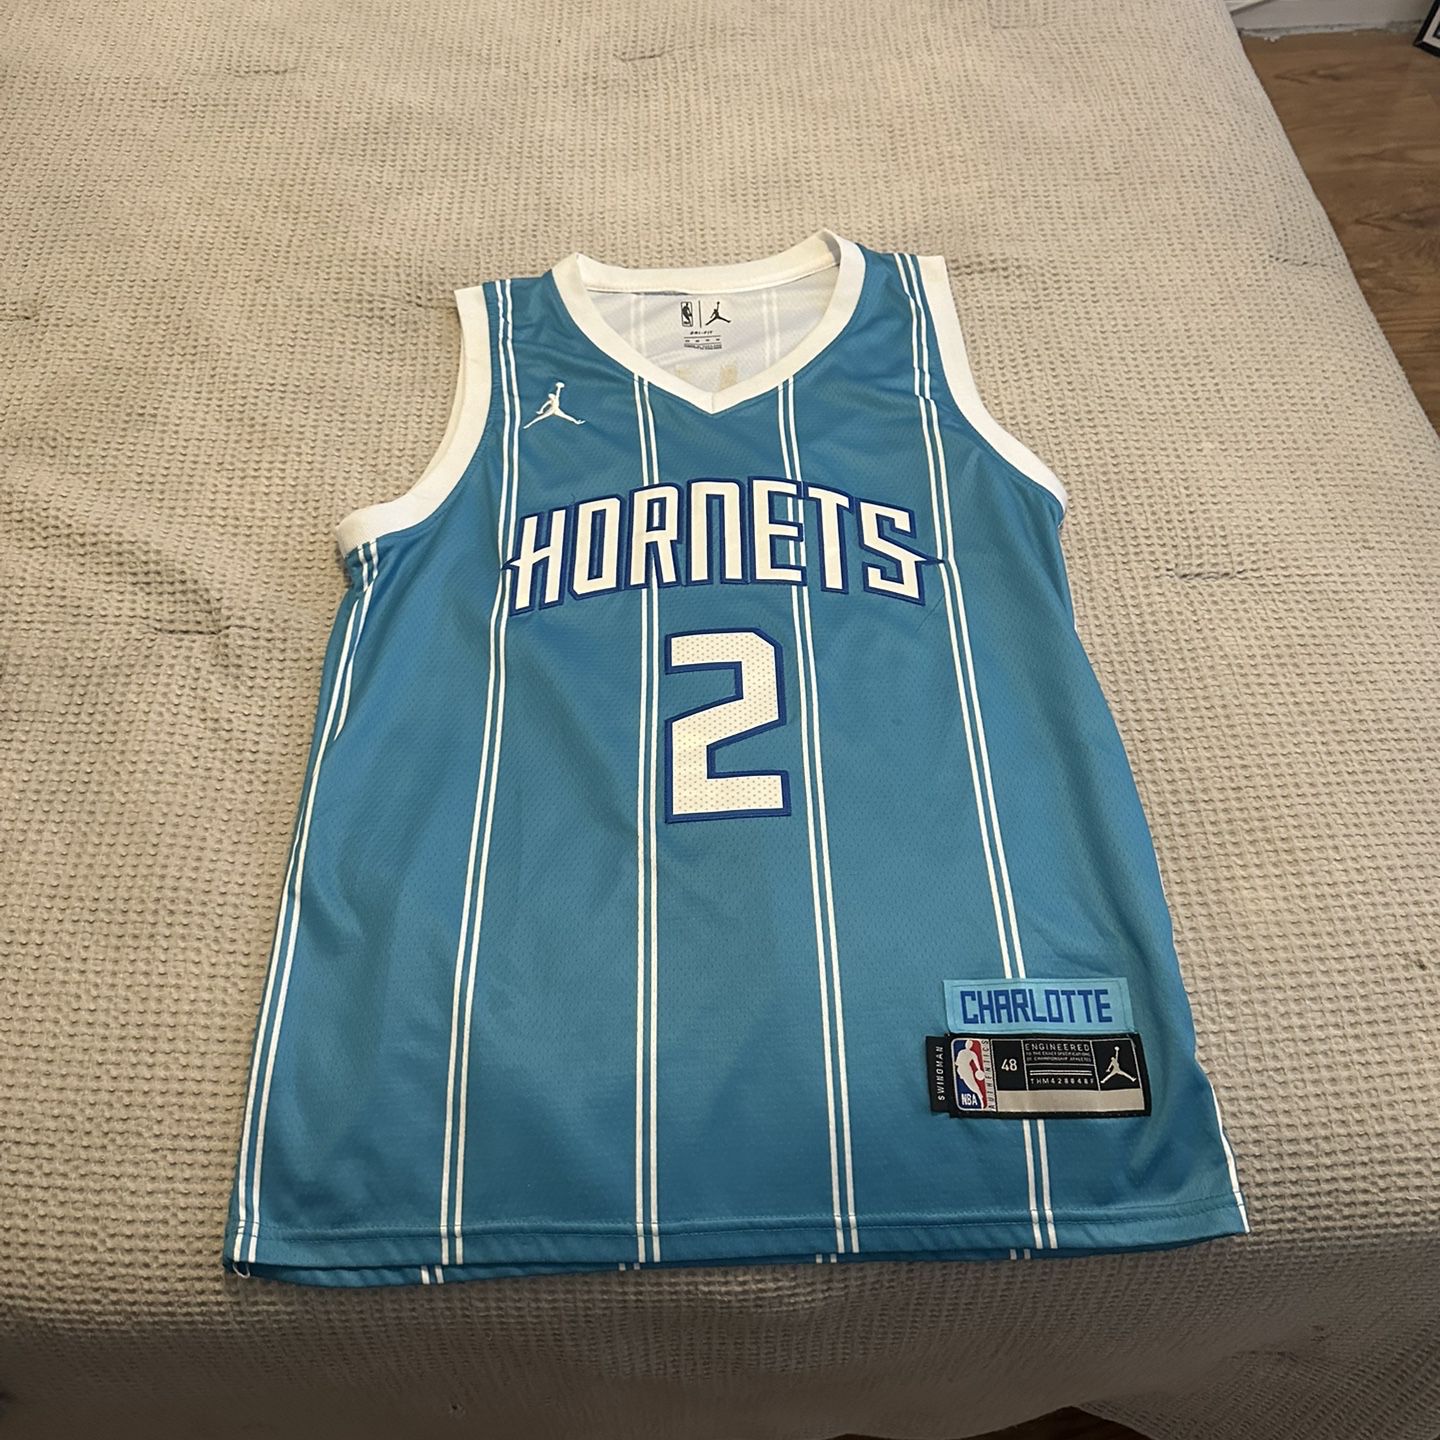 Charlotte Hornets Lamelo Ball Jersey - Rookie Year Jersey - w/ Embroidered  Signature - Size Men's Small for Sale in Roseville, CA - OfferUp